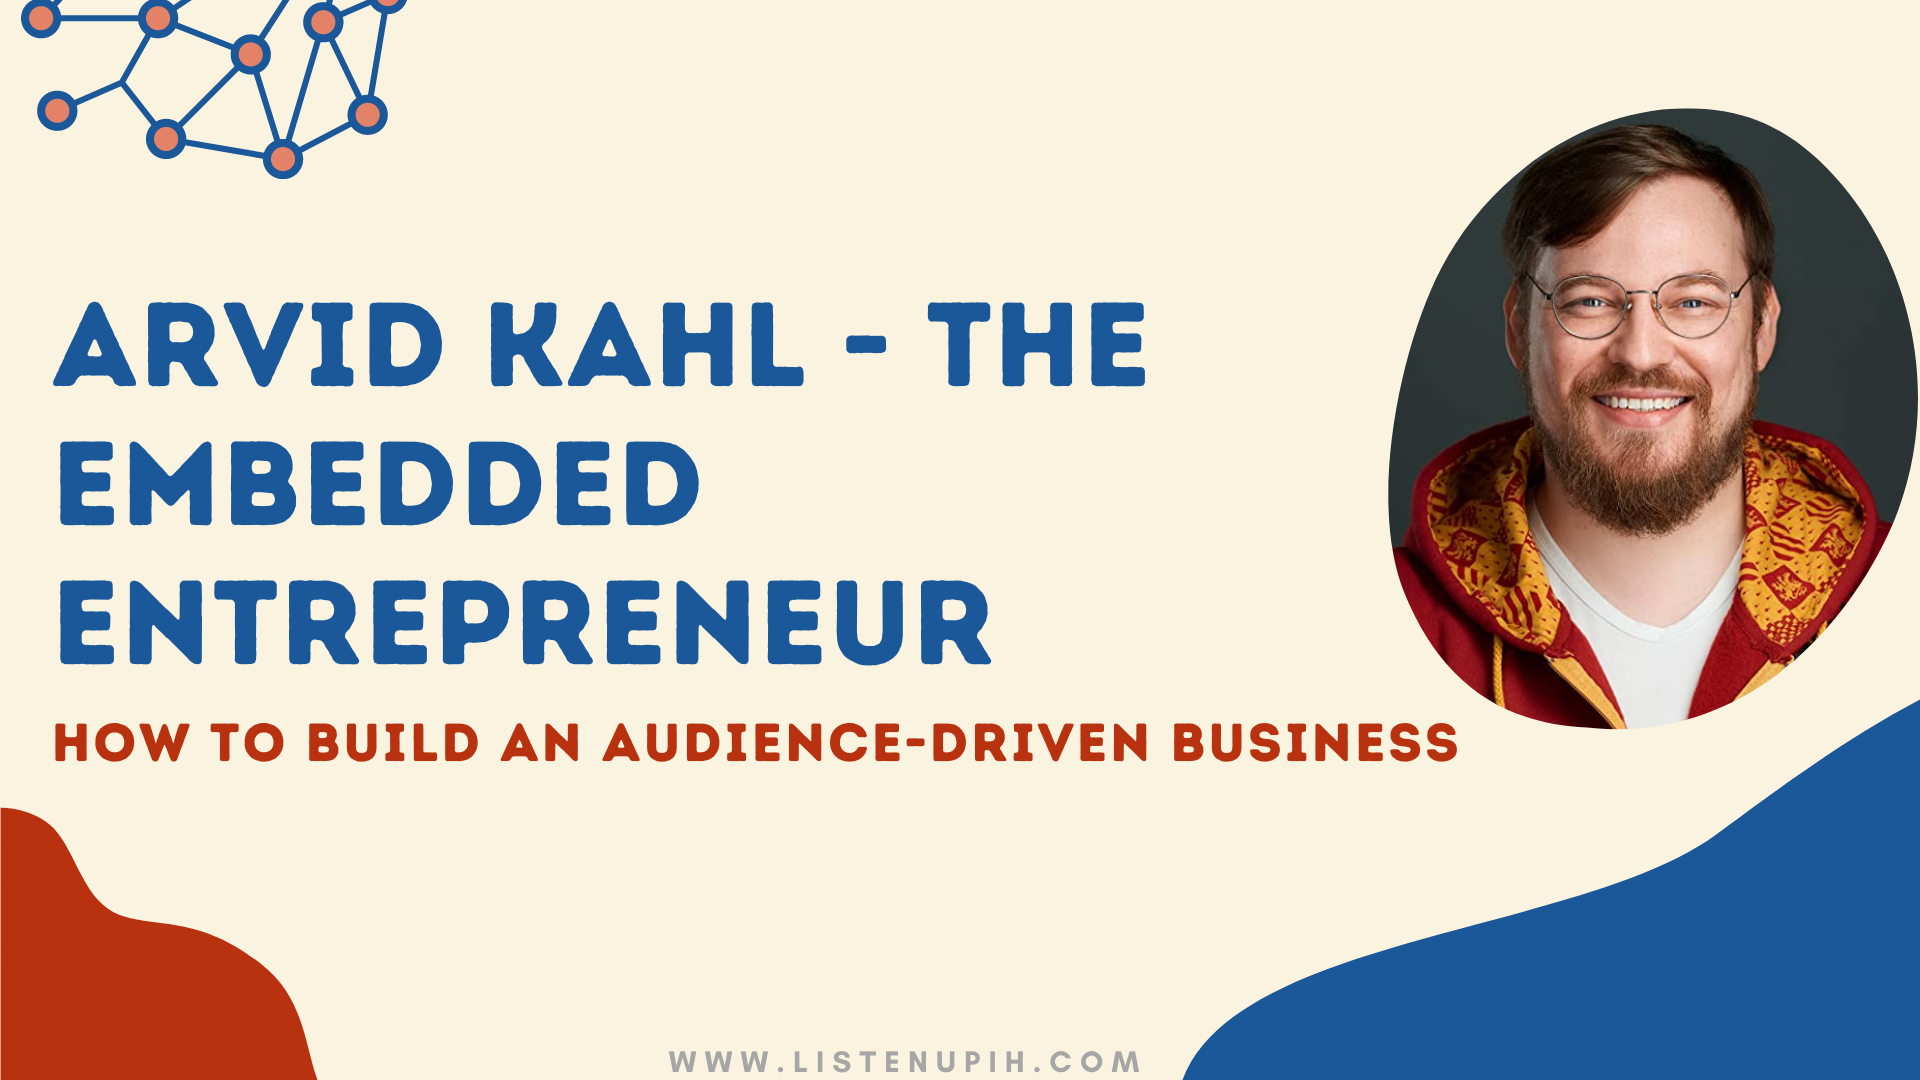 How to build an audience-driven business👨‍👩‍👧‍👦 | Arvid Kahl - The Embedded Entrepreneur